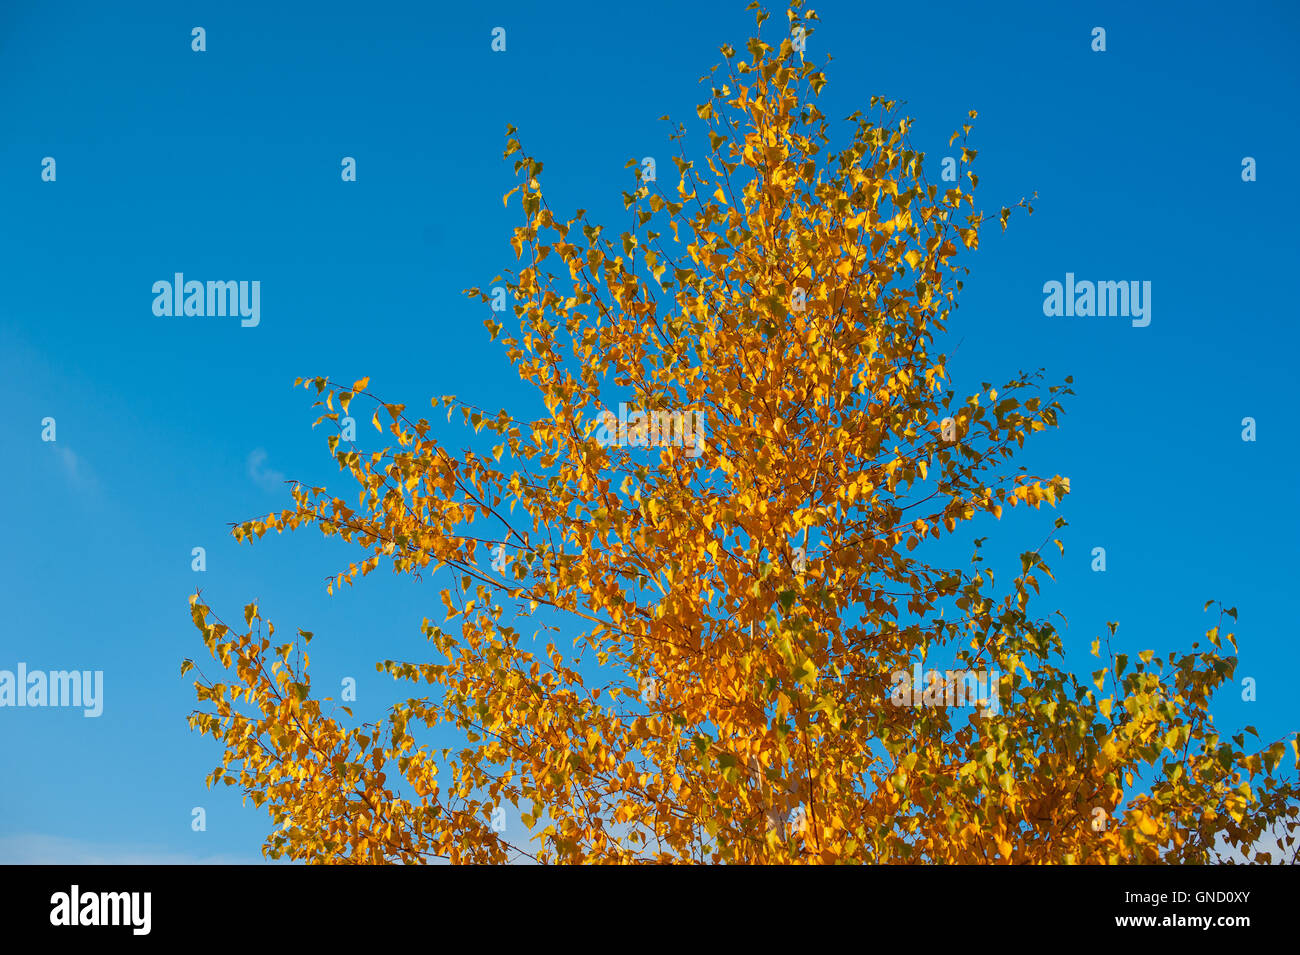 Yellow leaves on autumn trees against the blue sky Stock Photo